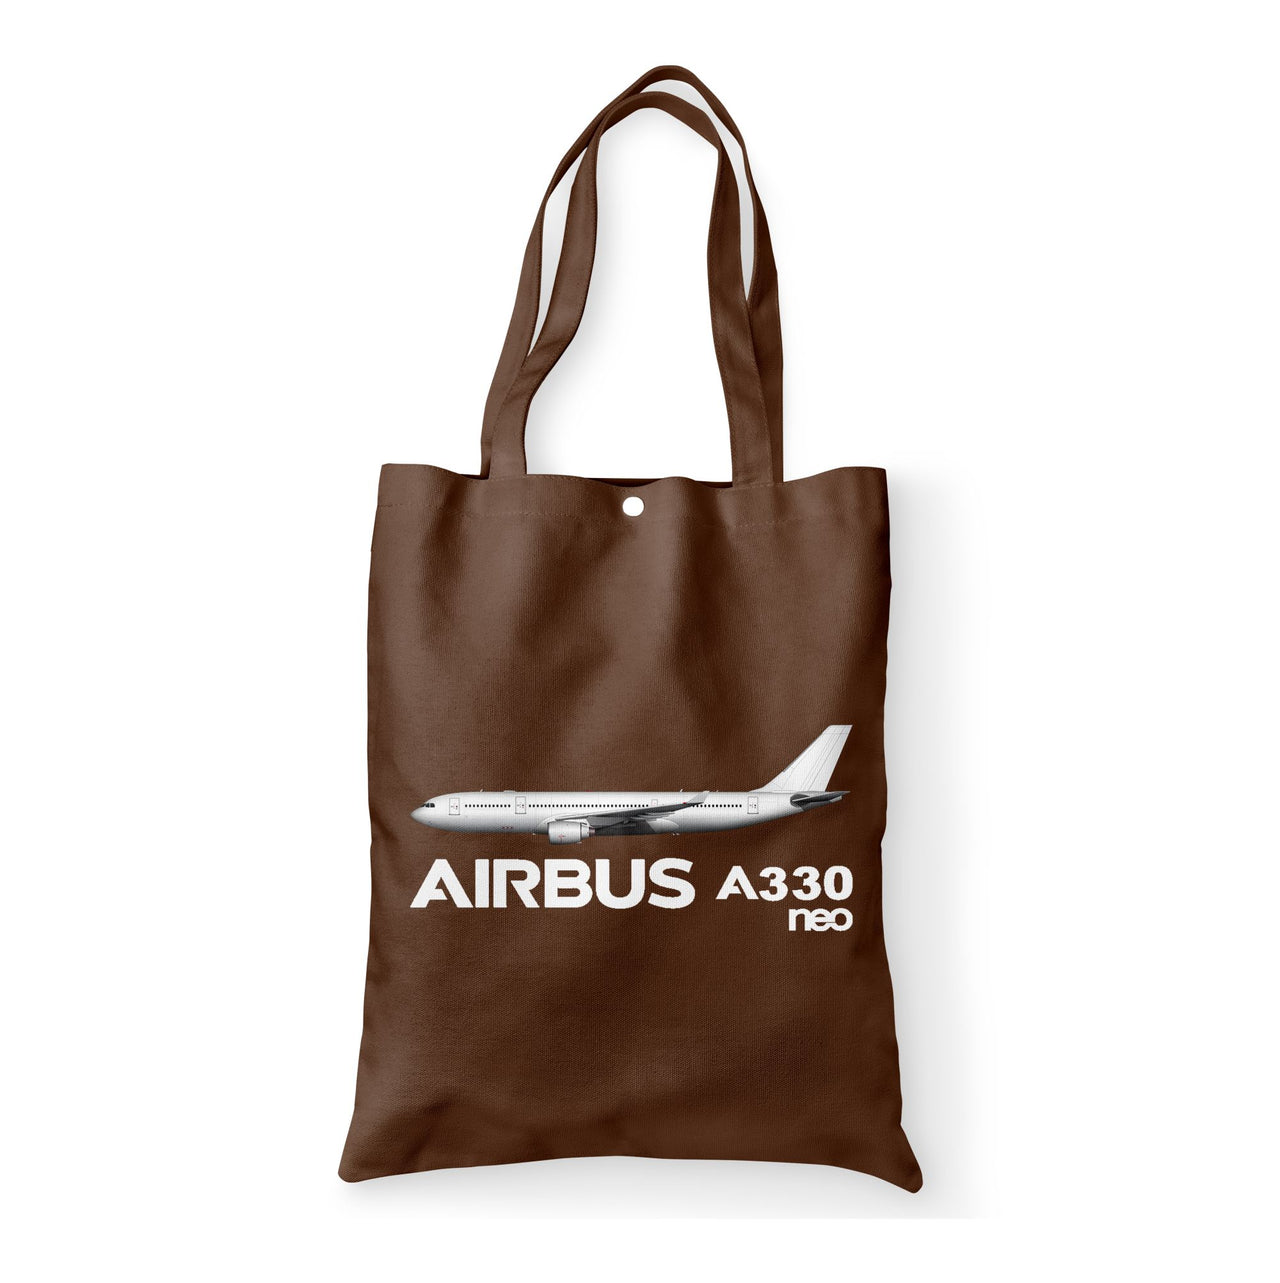 The Airbus A330neo Designed Tote Bags